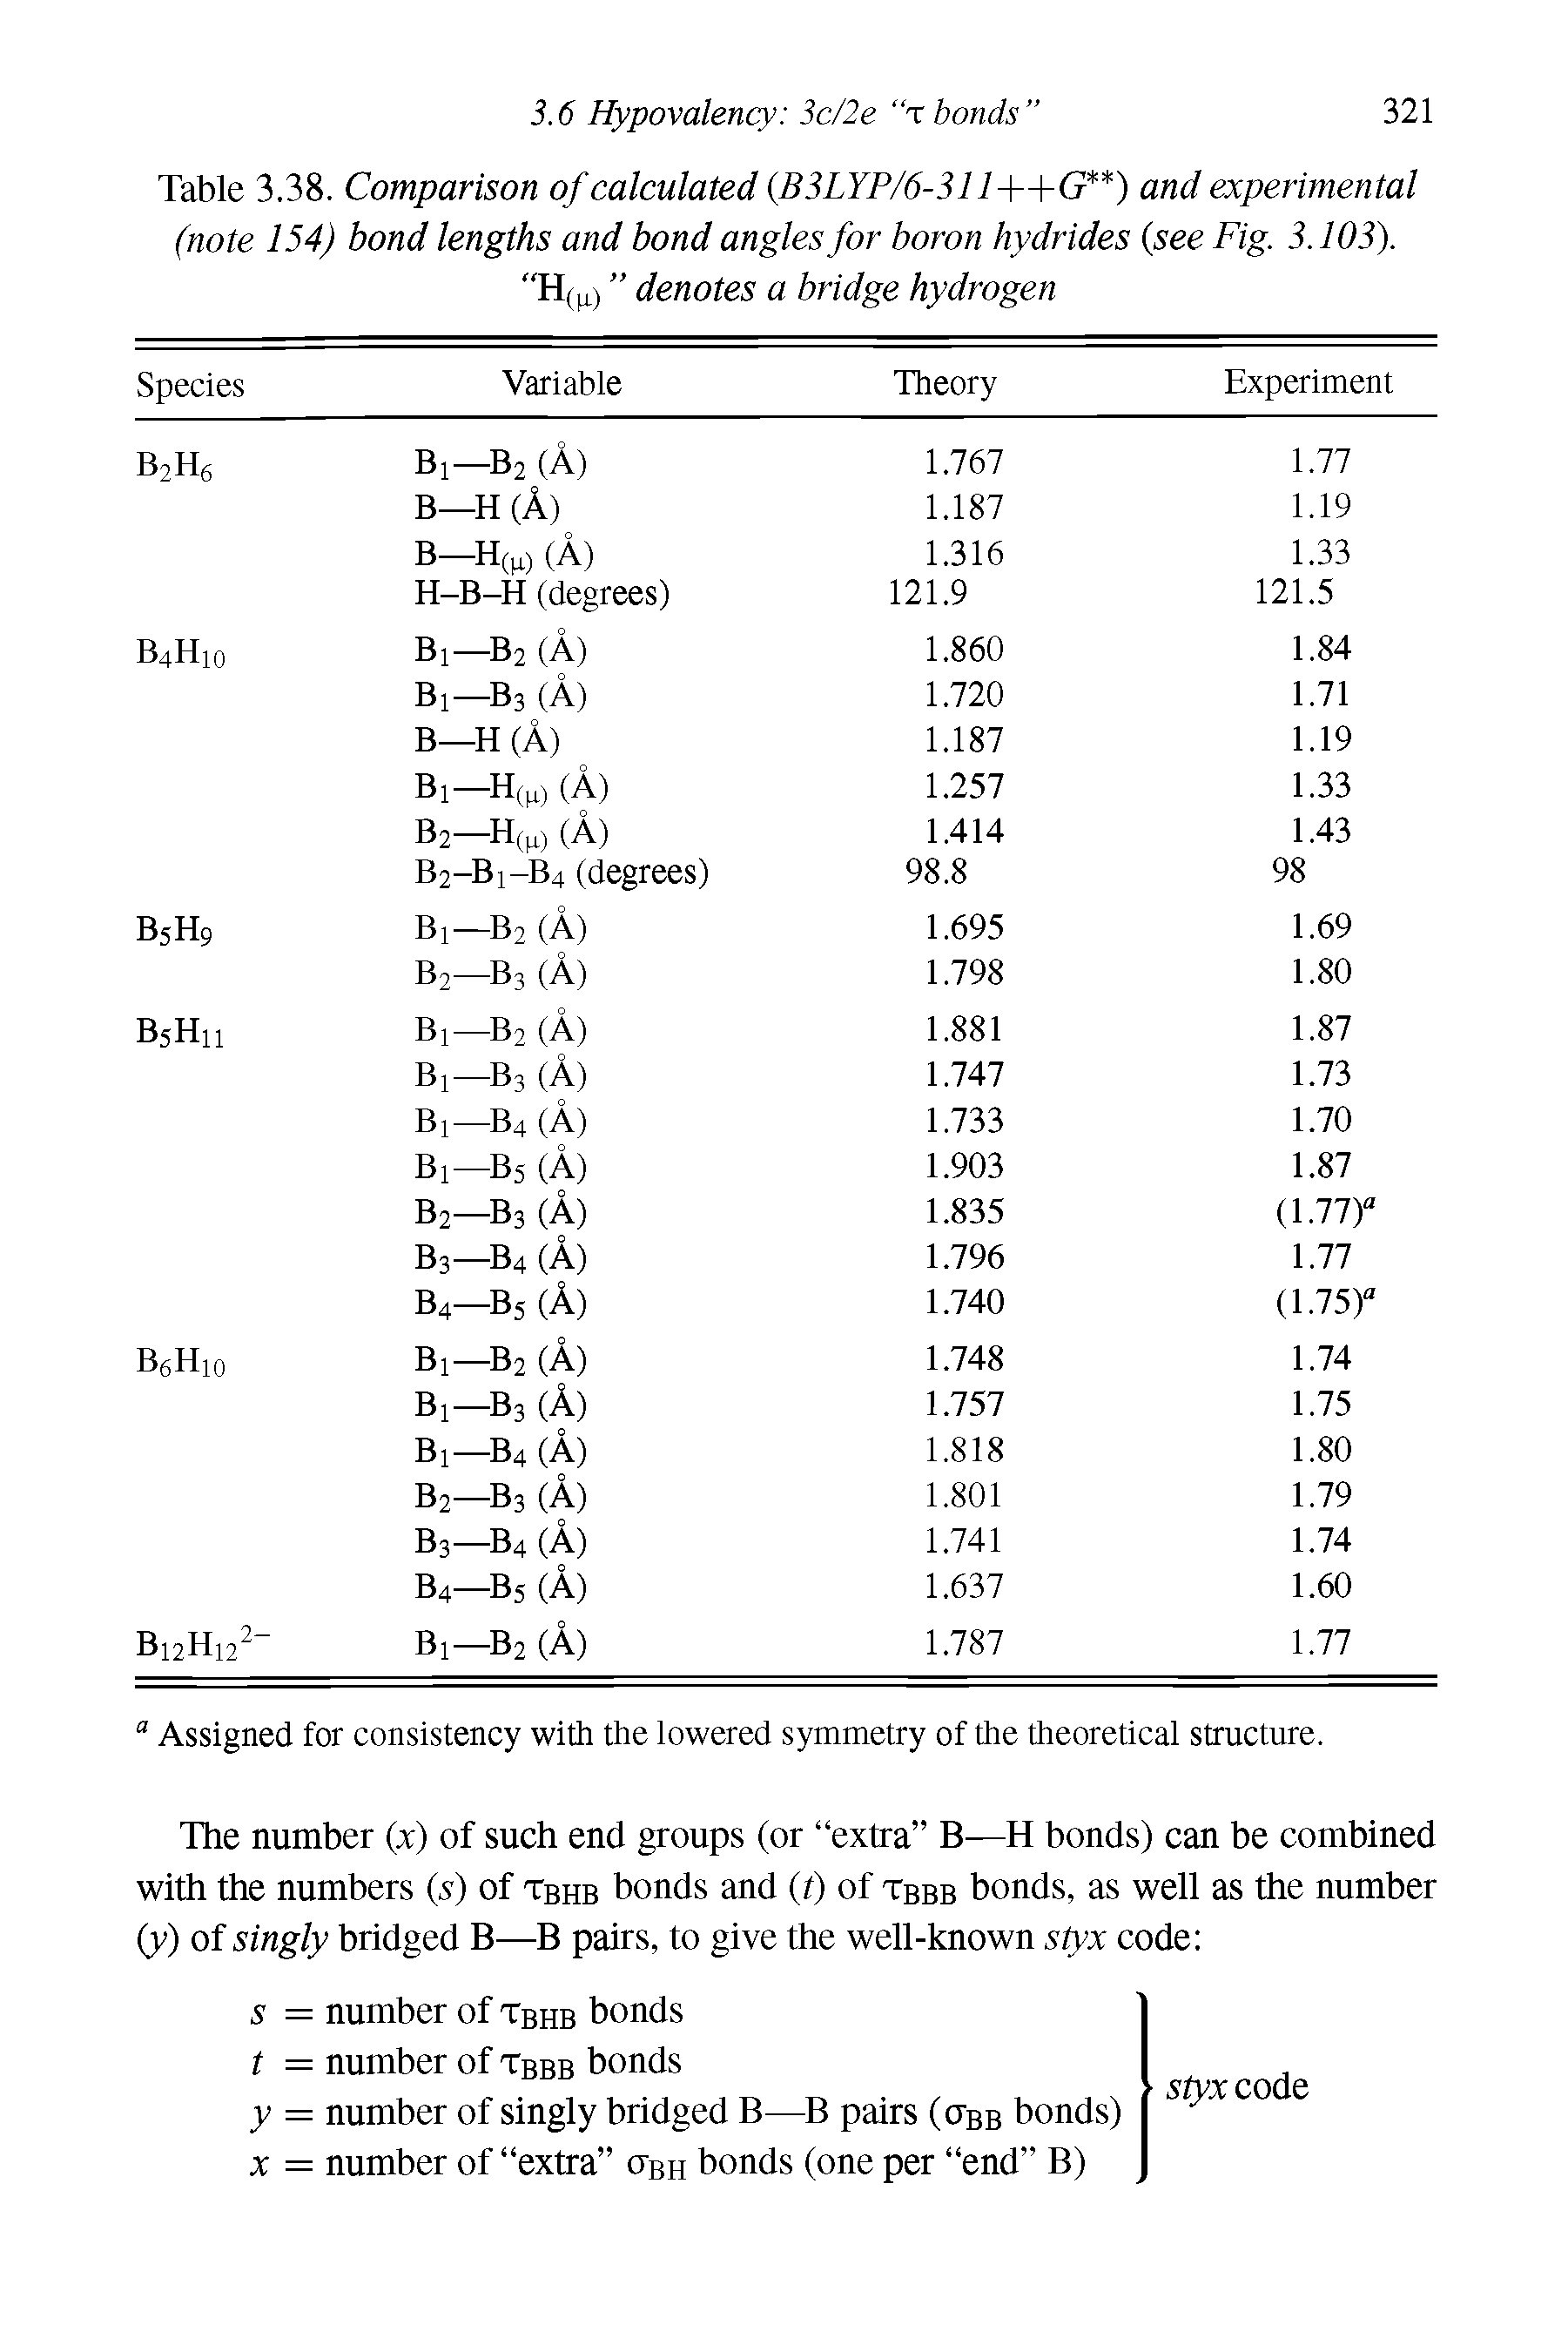 Table 3.38. Comparison of calculated (B3LYP/6-311++G ) and experimental (note 154) bond lengths and bond angles for boron hydrides (see Fig. 3.103). H( ) denotes a bridge hydrogen...